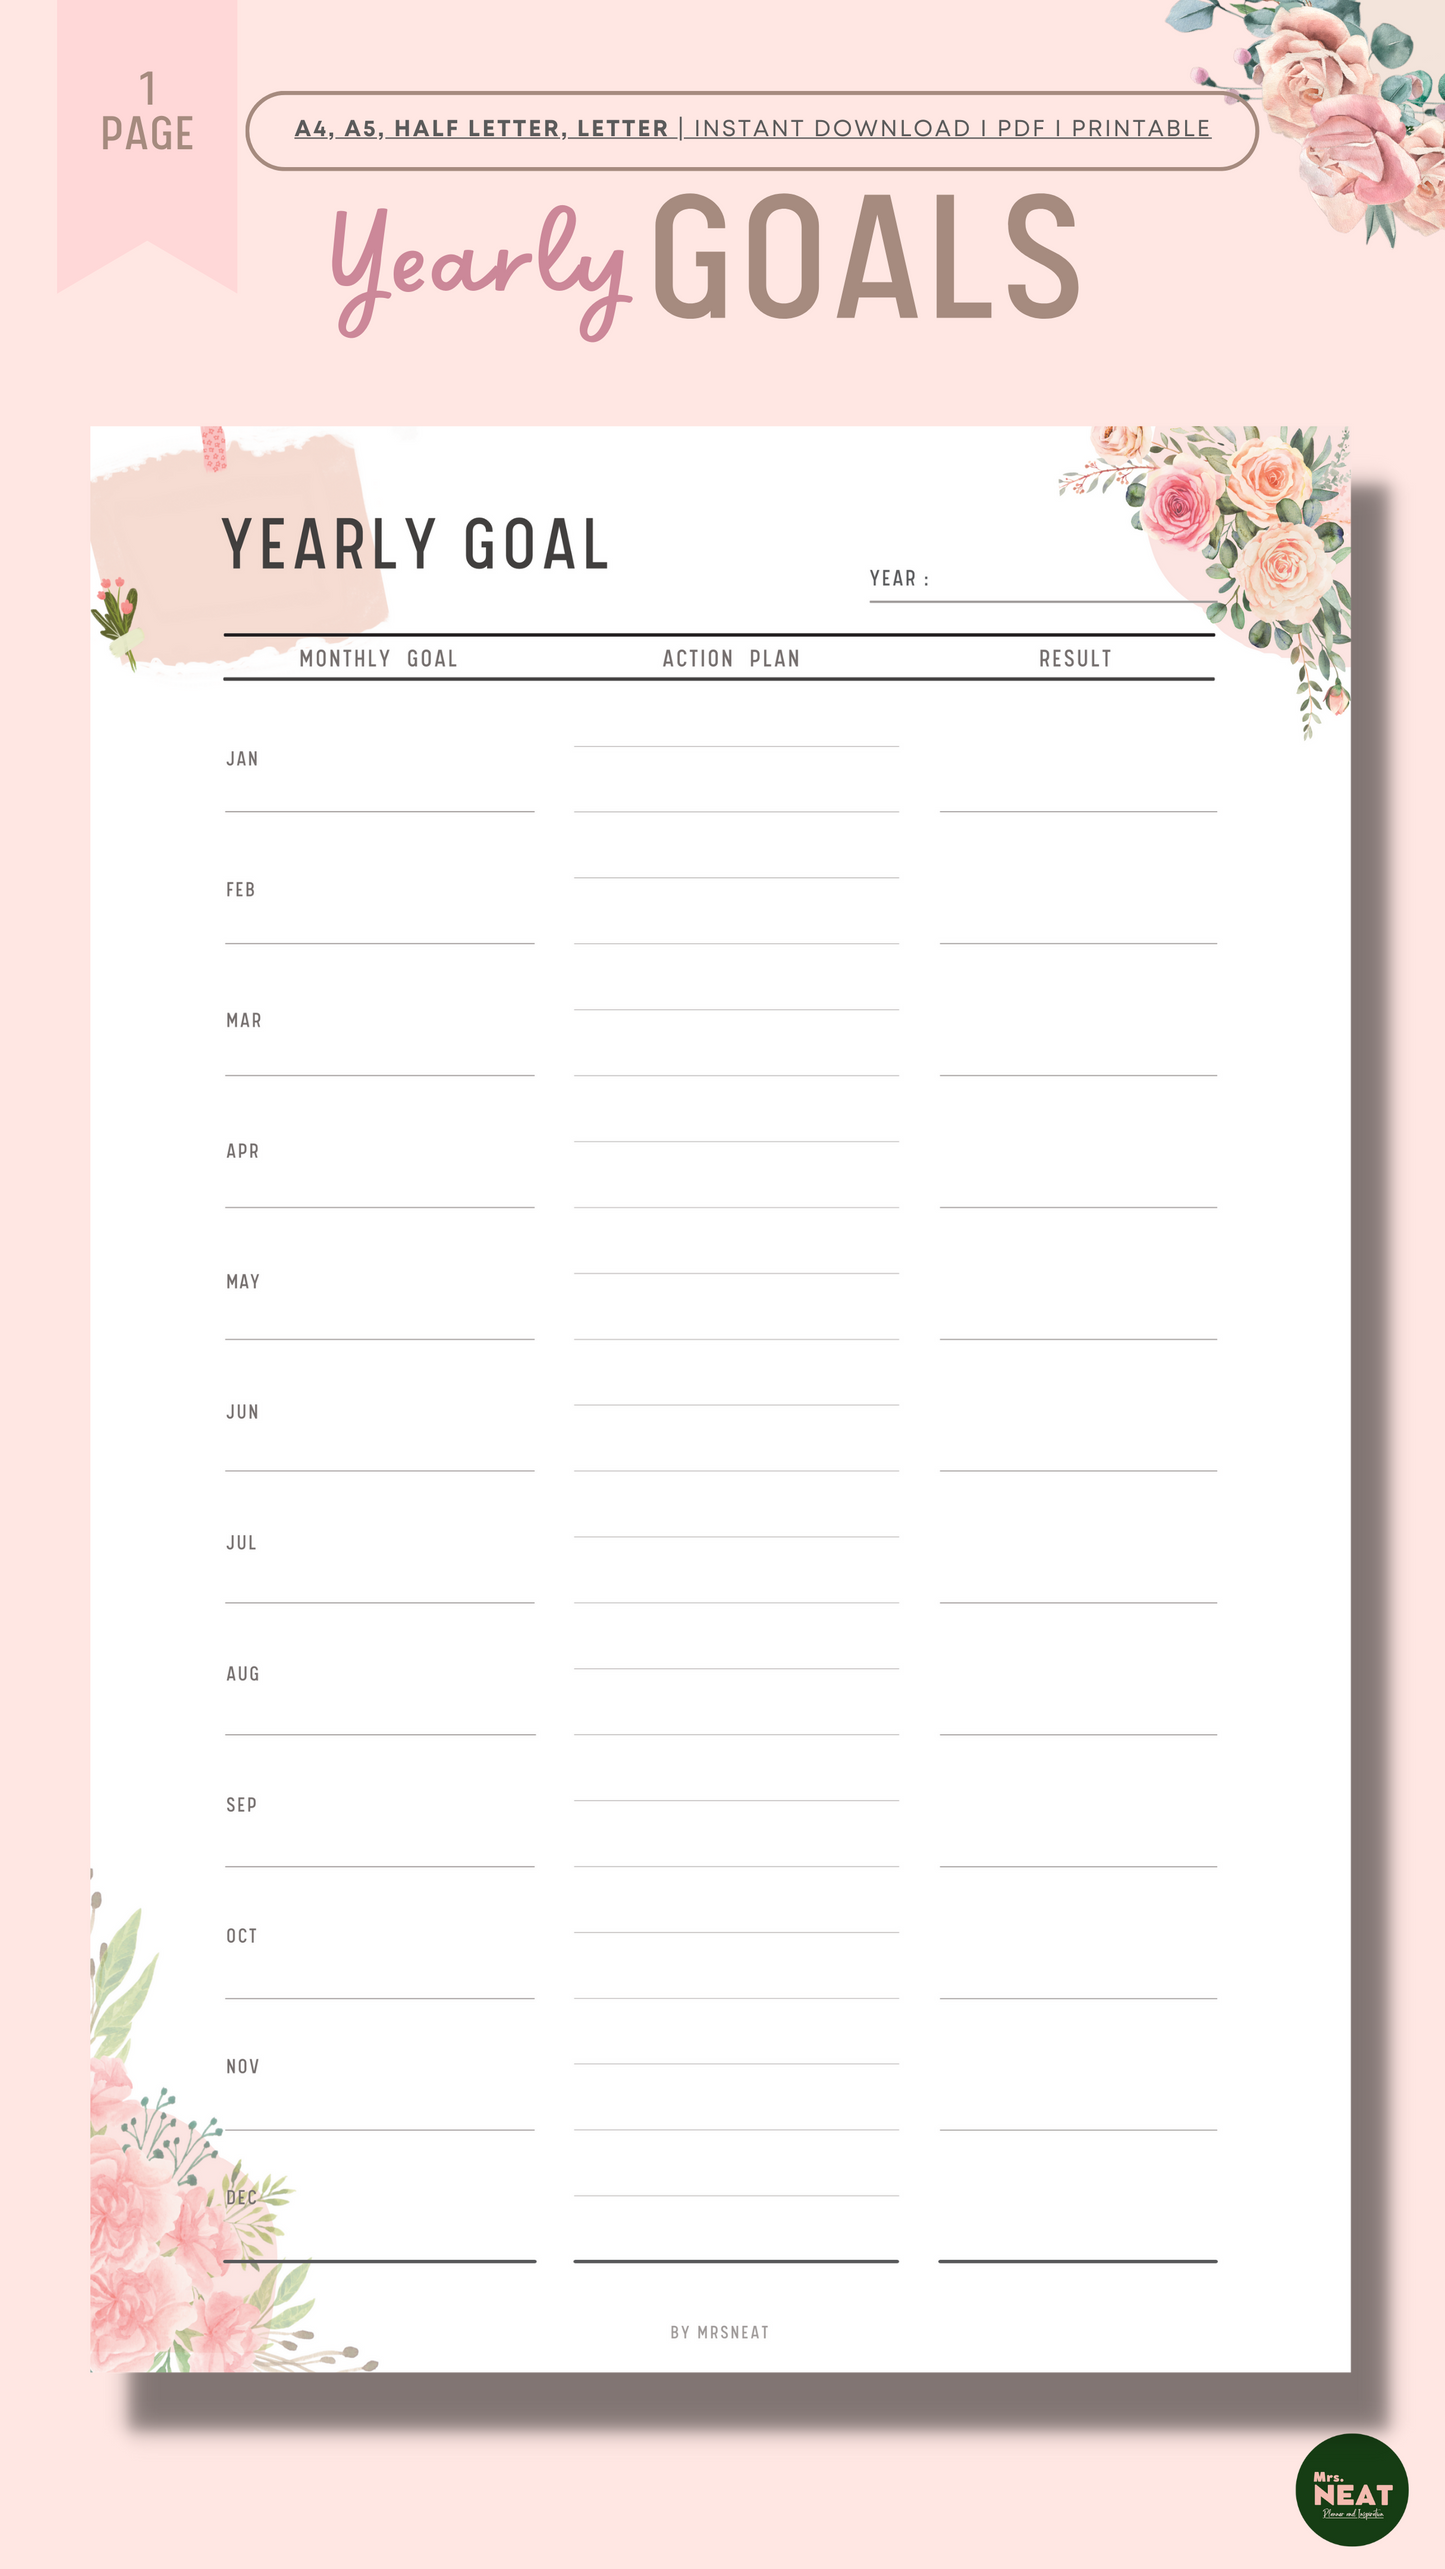 Beautiful Floral Yearly Goal Planner with room for monthly goal, action plan and result